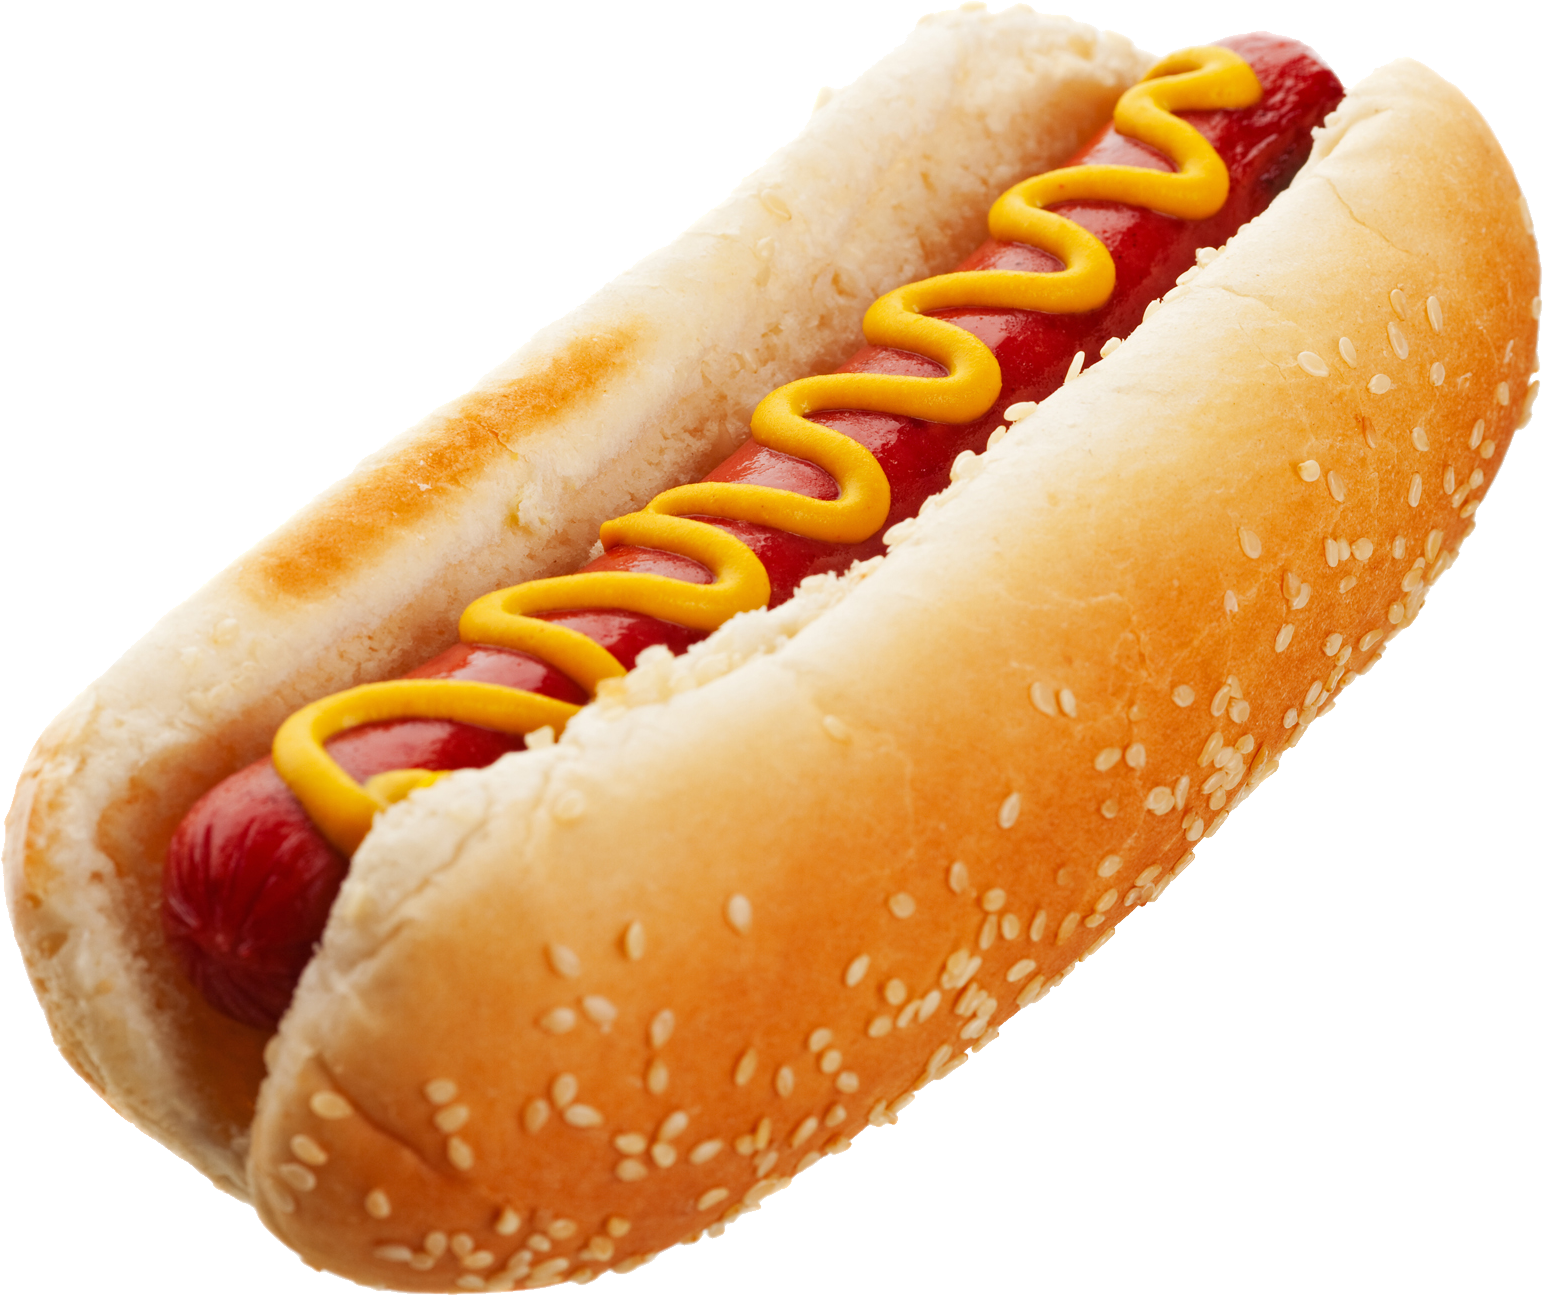 File:Hot dog with mustard.png